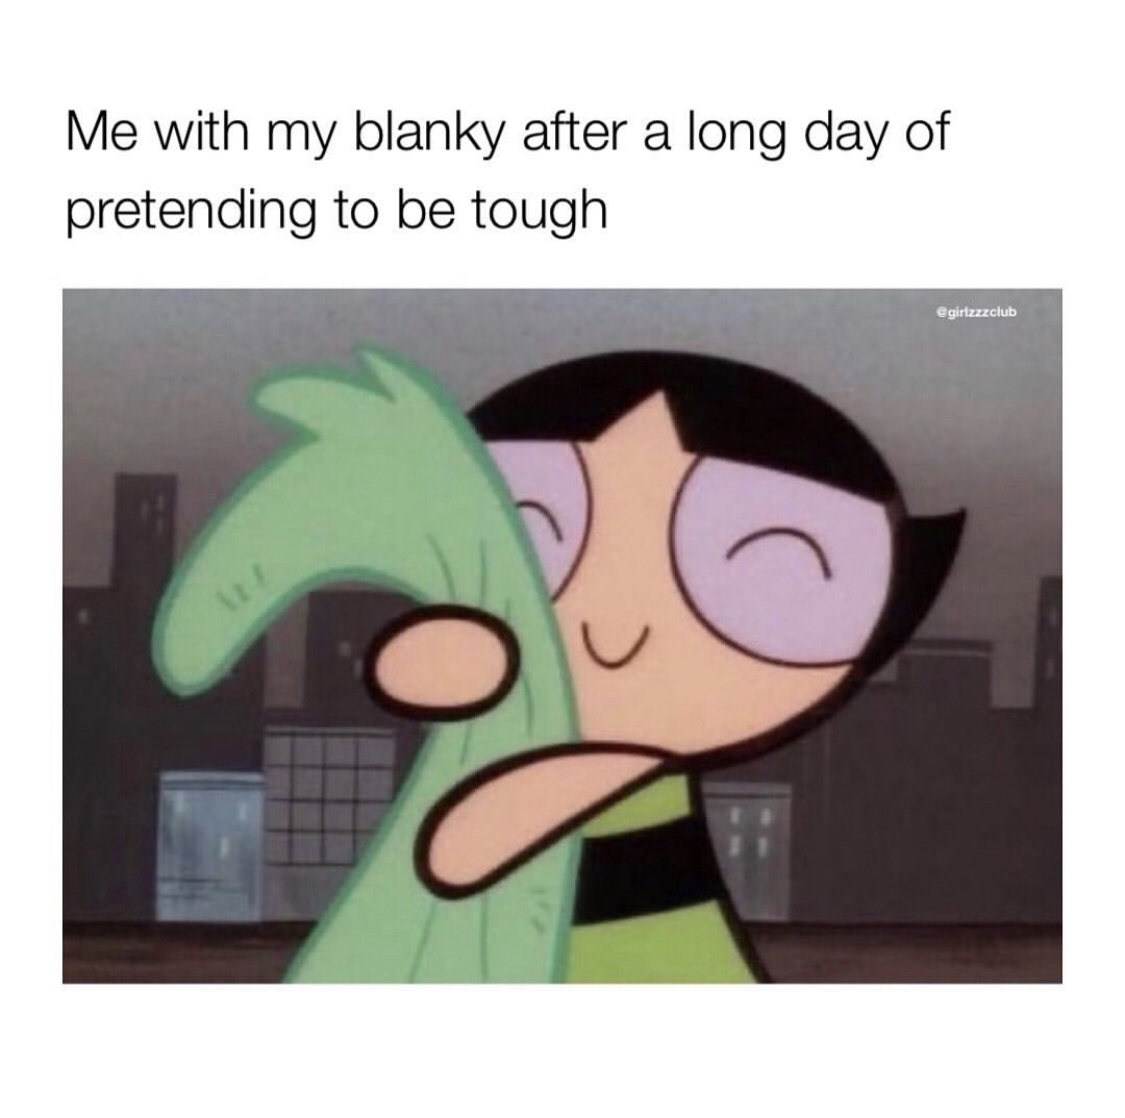 powerpuff girls buttercup blanket - Me with my blanky after a long day of pretending to be tough